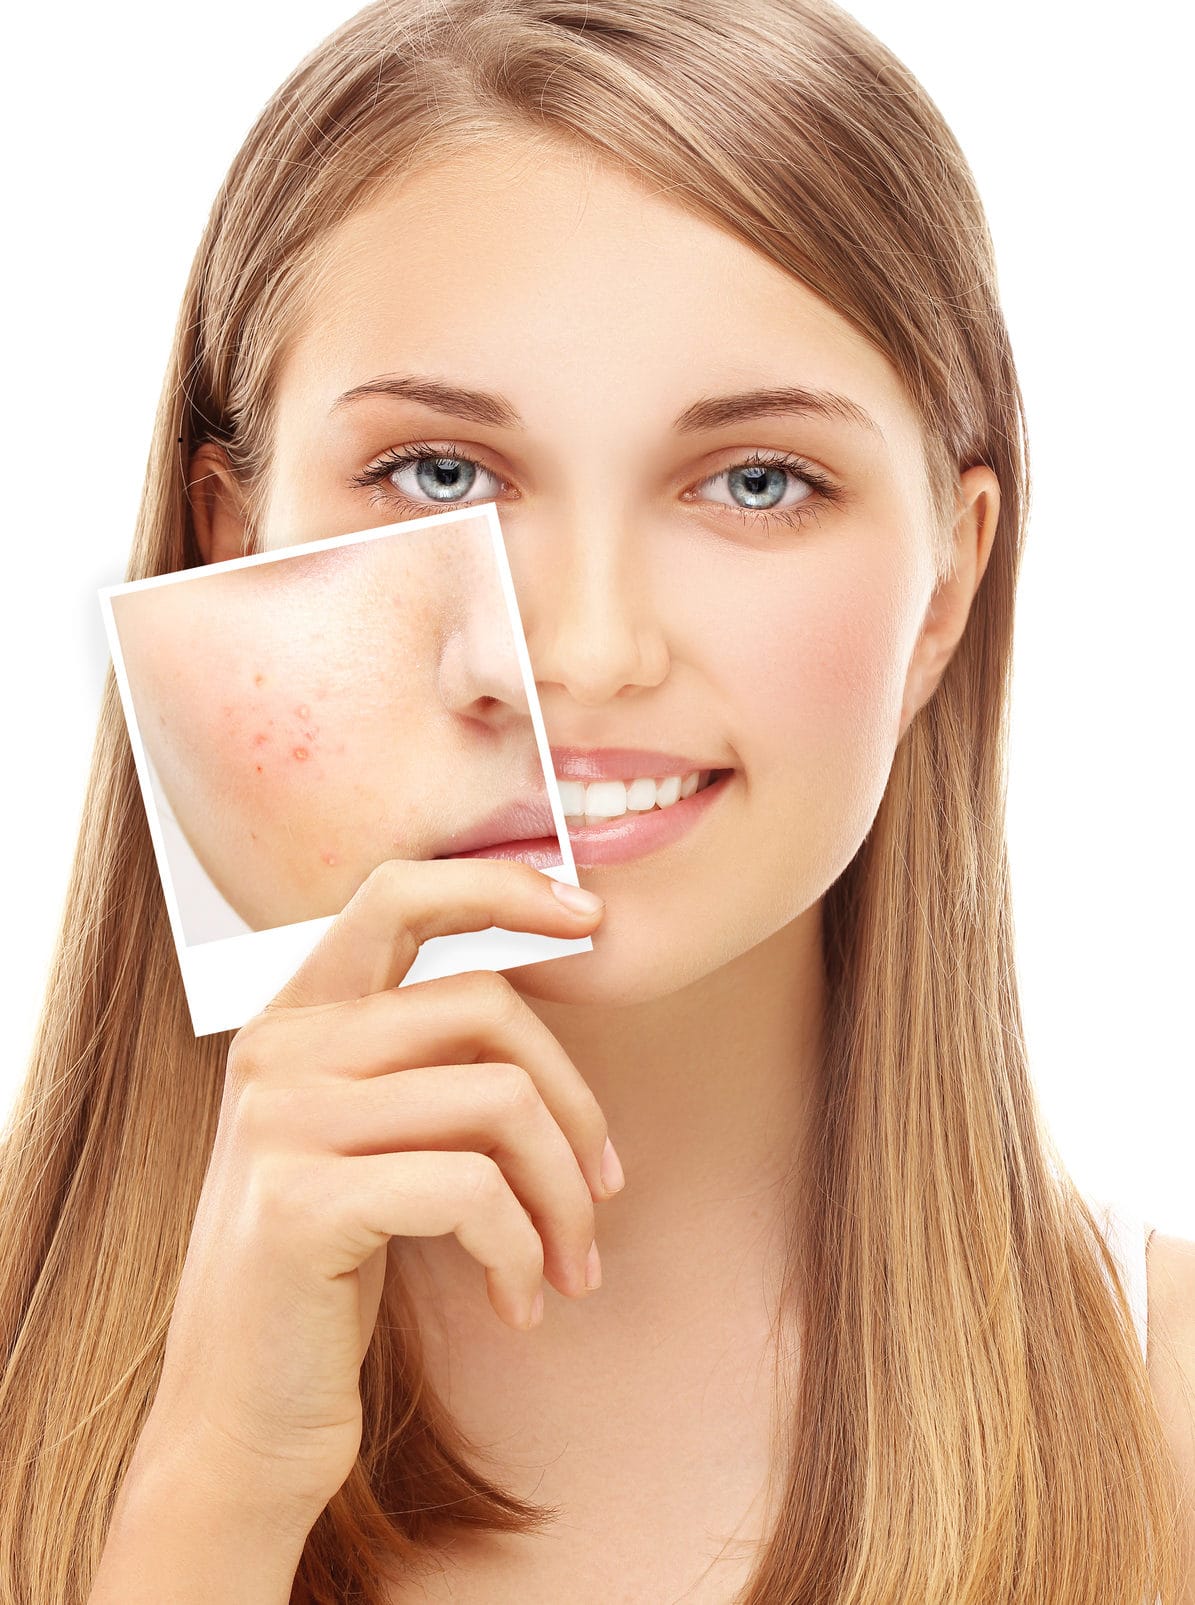 close up headshot of woman holding photo of previous acne scars against her face with solid white background behind her